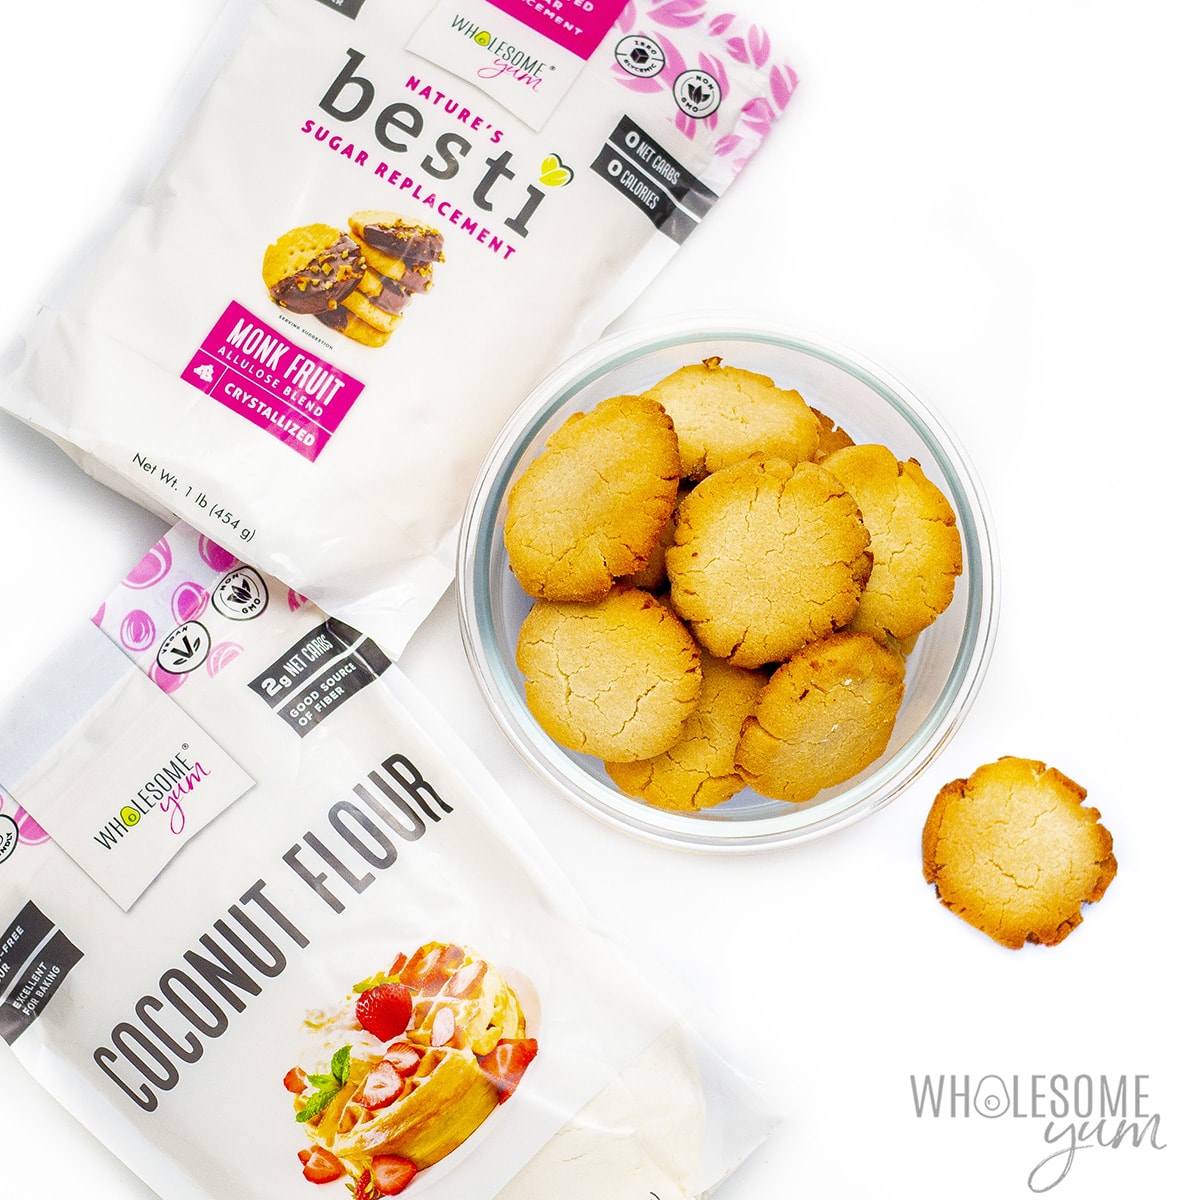 Shortbread cookies for banana pudding next to bag of Besti and Wholesome Yum Coconut Flour.